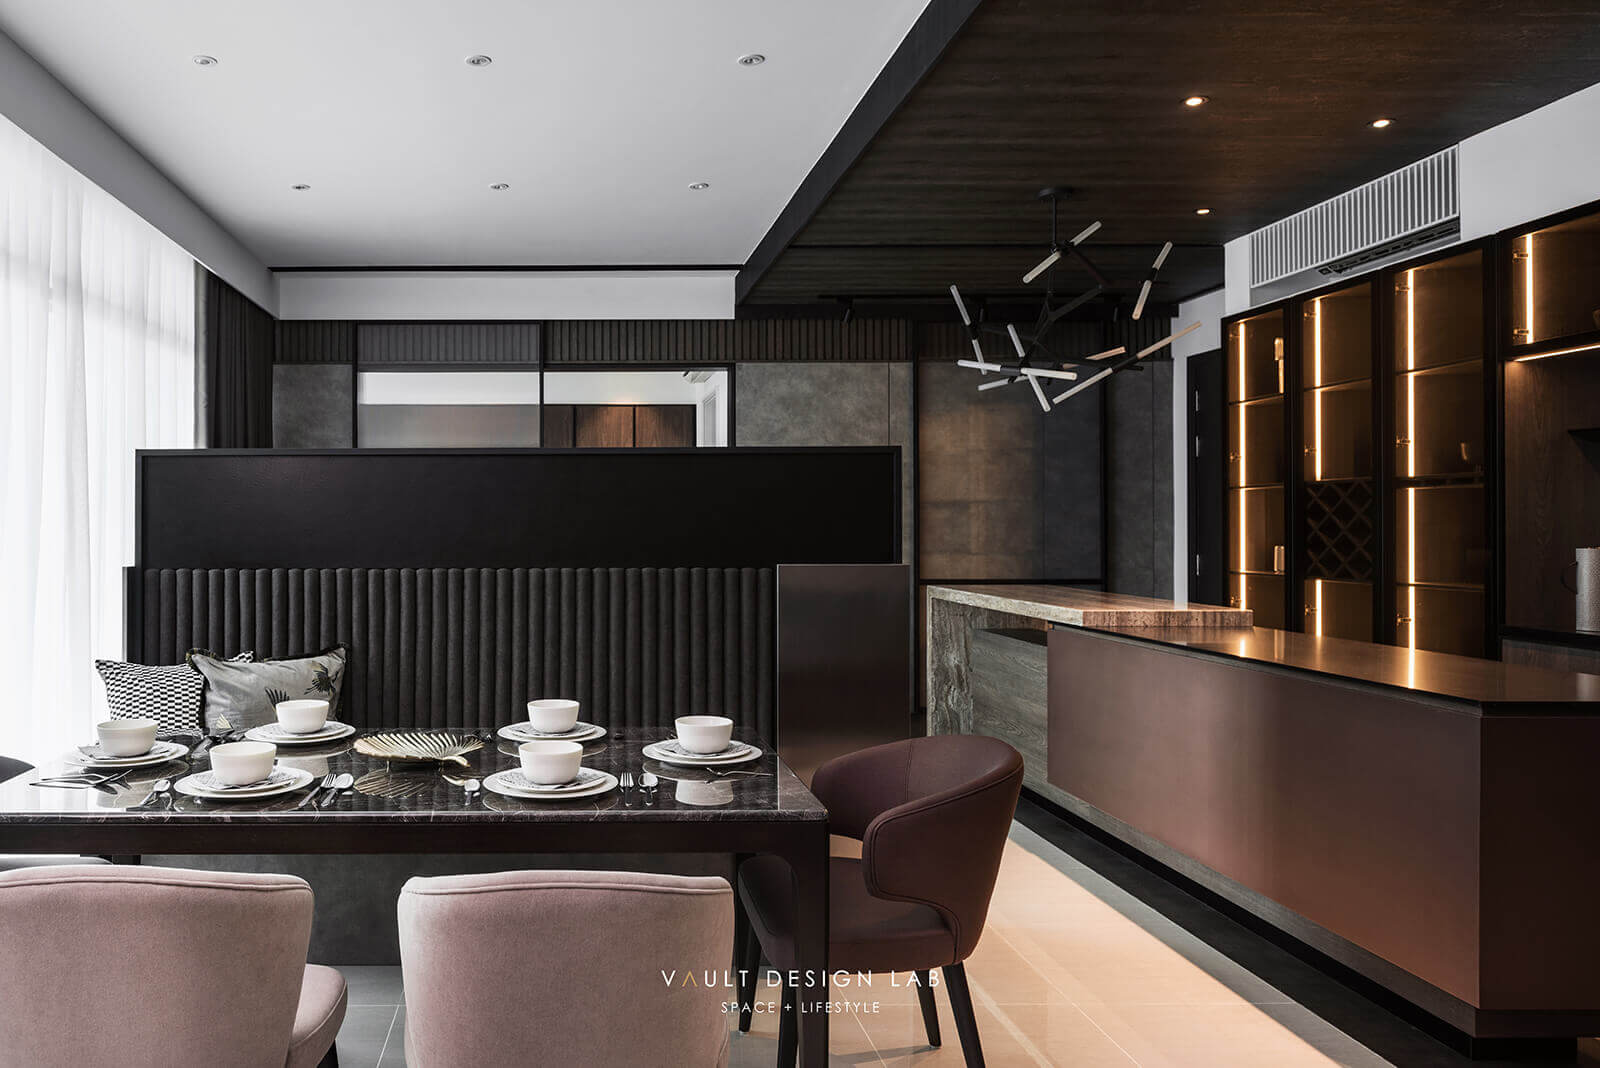 Interior Design The Light Collection III Penang Malaysia Dry Kitchen